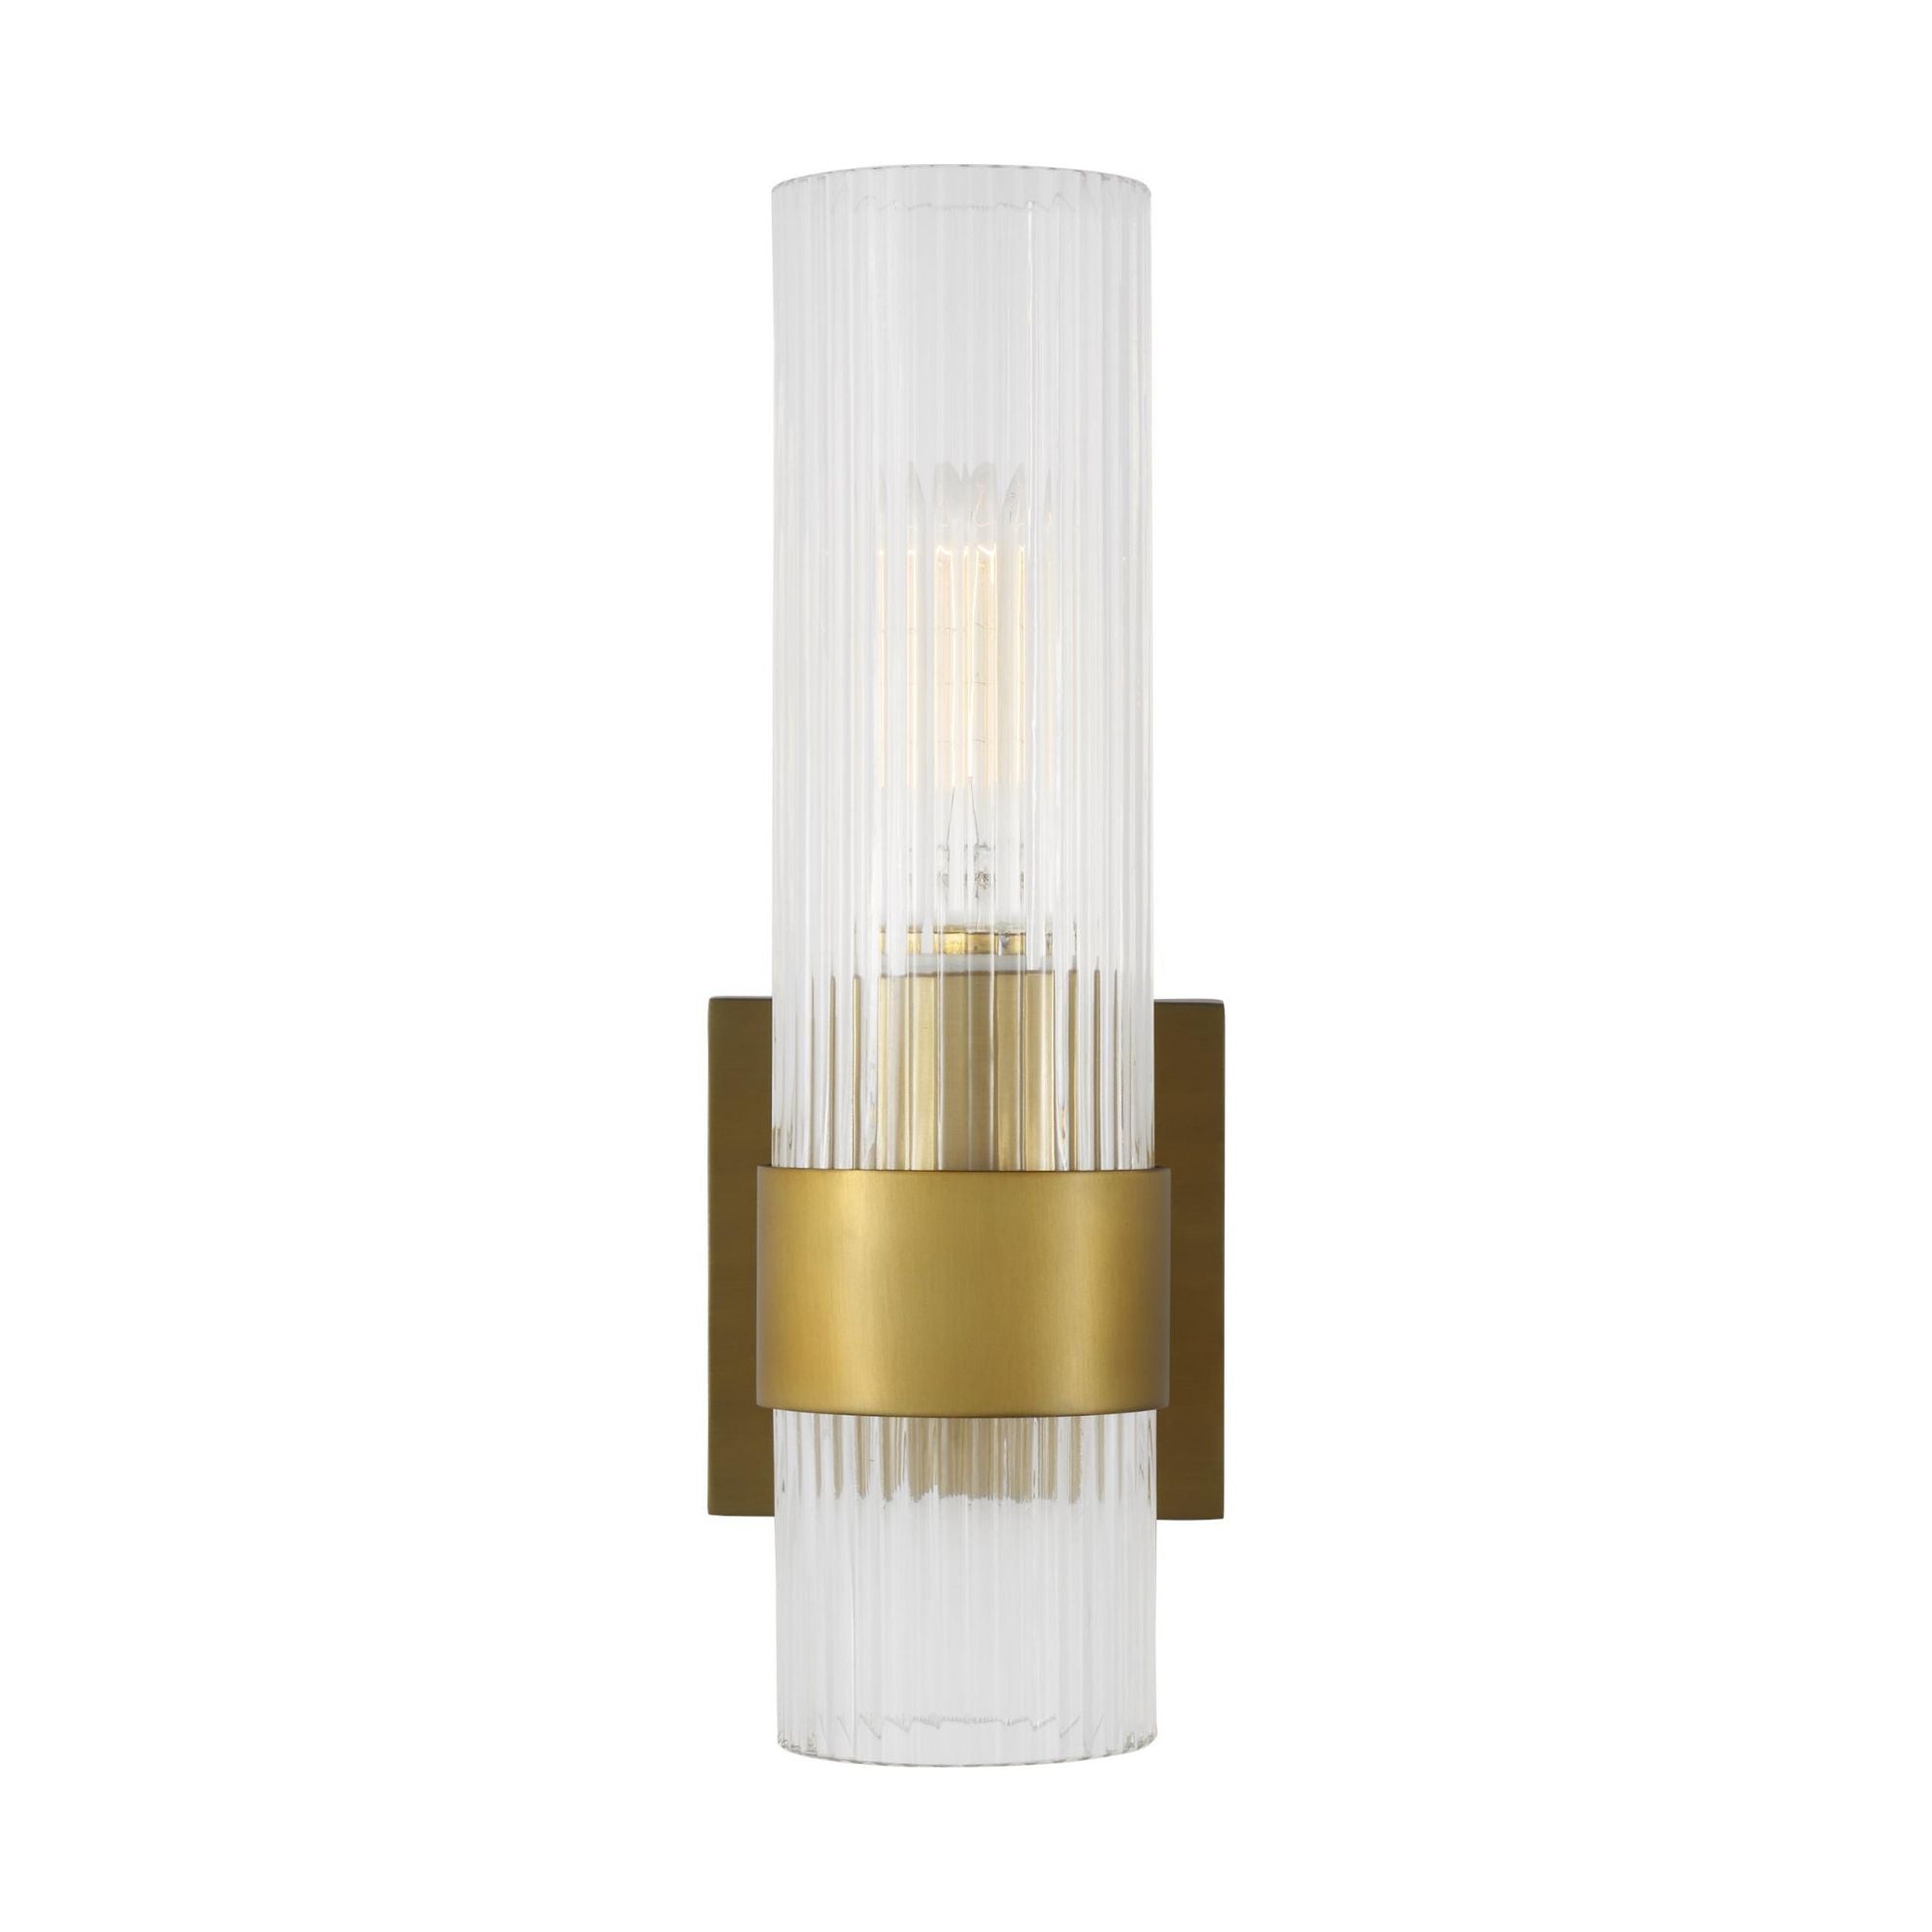 Chapman & Myers Geneva Sconce in Burnished Brass